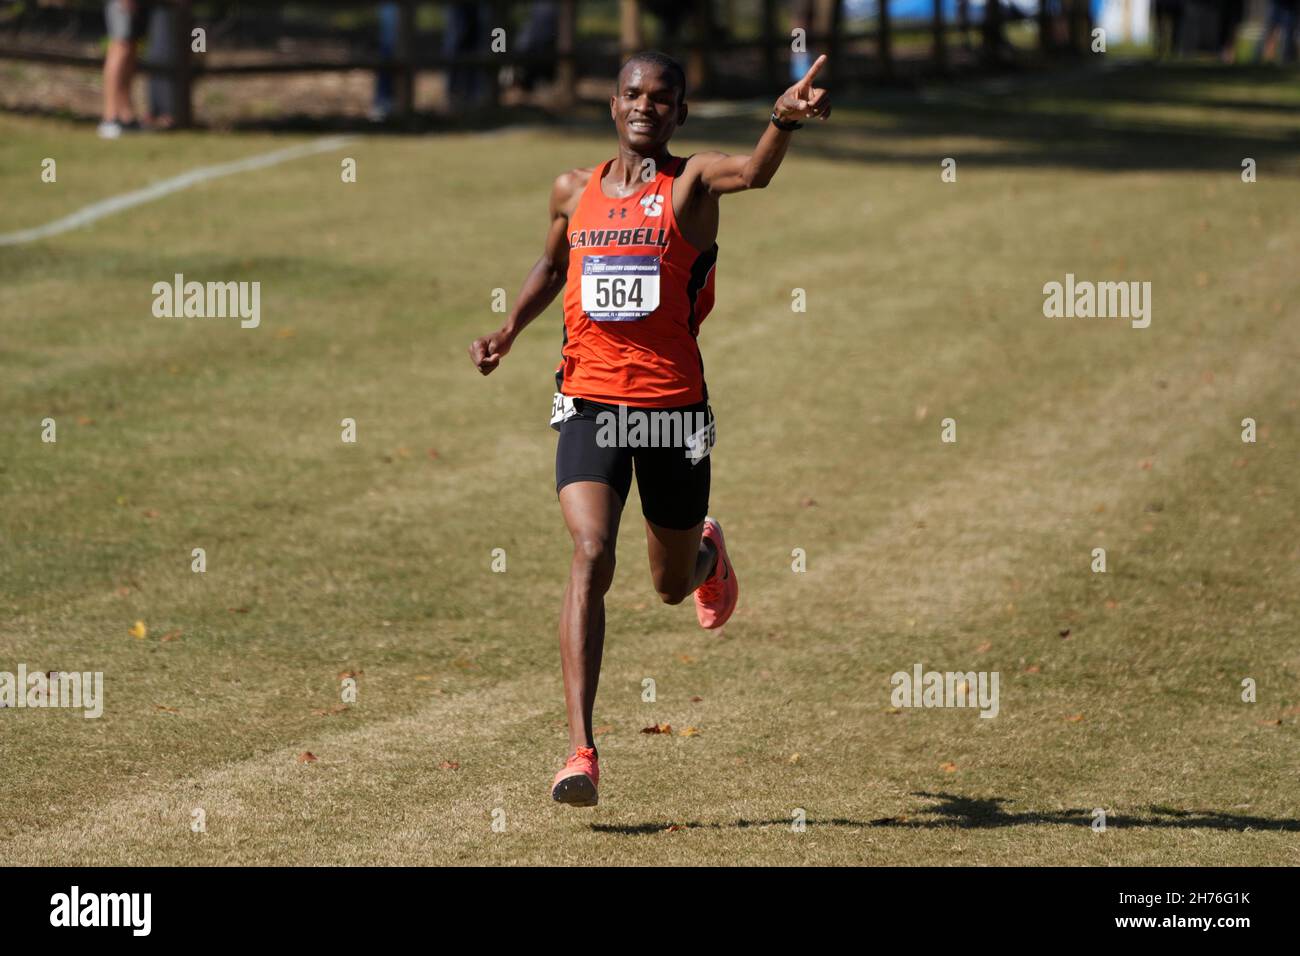 Athanas Kioko of Campbell celebrates after placing third in the men's race in 28:49.9 during the NCAA cross country championships at Apalachee Regiona Stock Photo